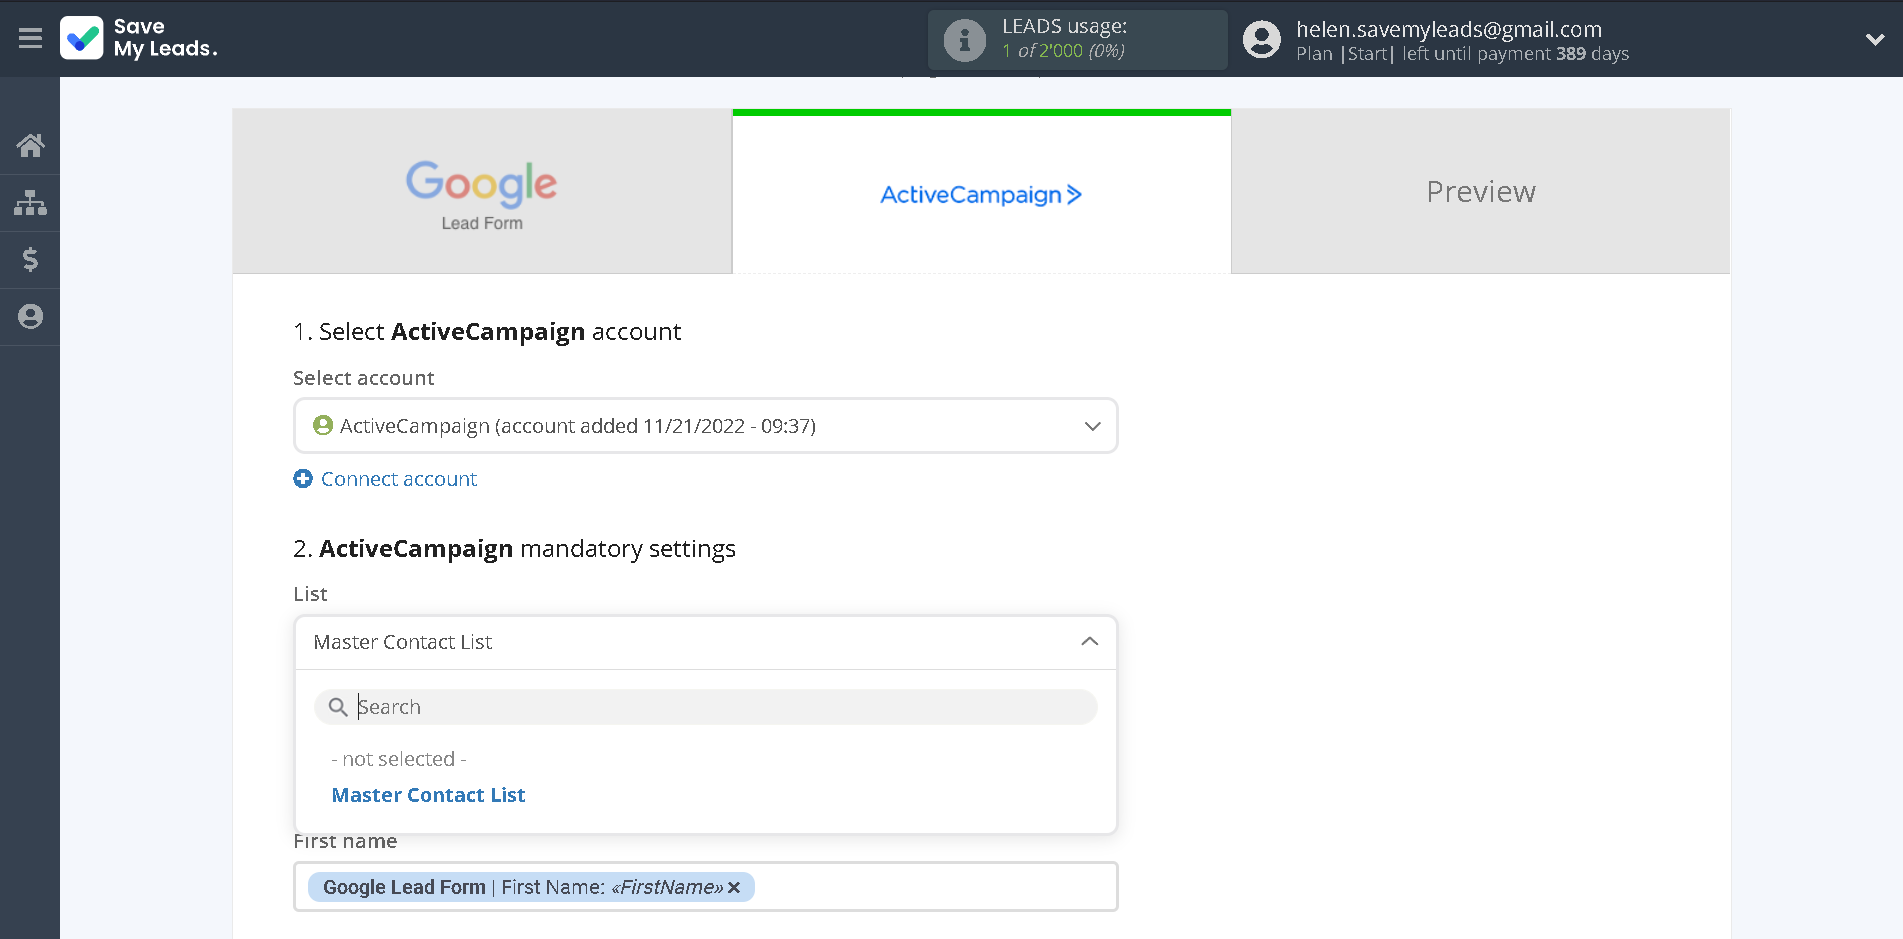 How to Connect Google Lead Form with ActiveCampaign Create Contacts | Assigning fields